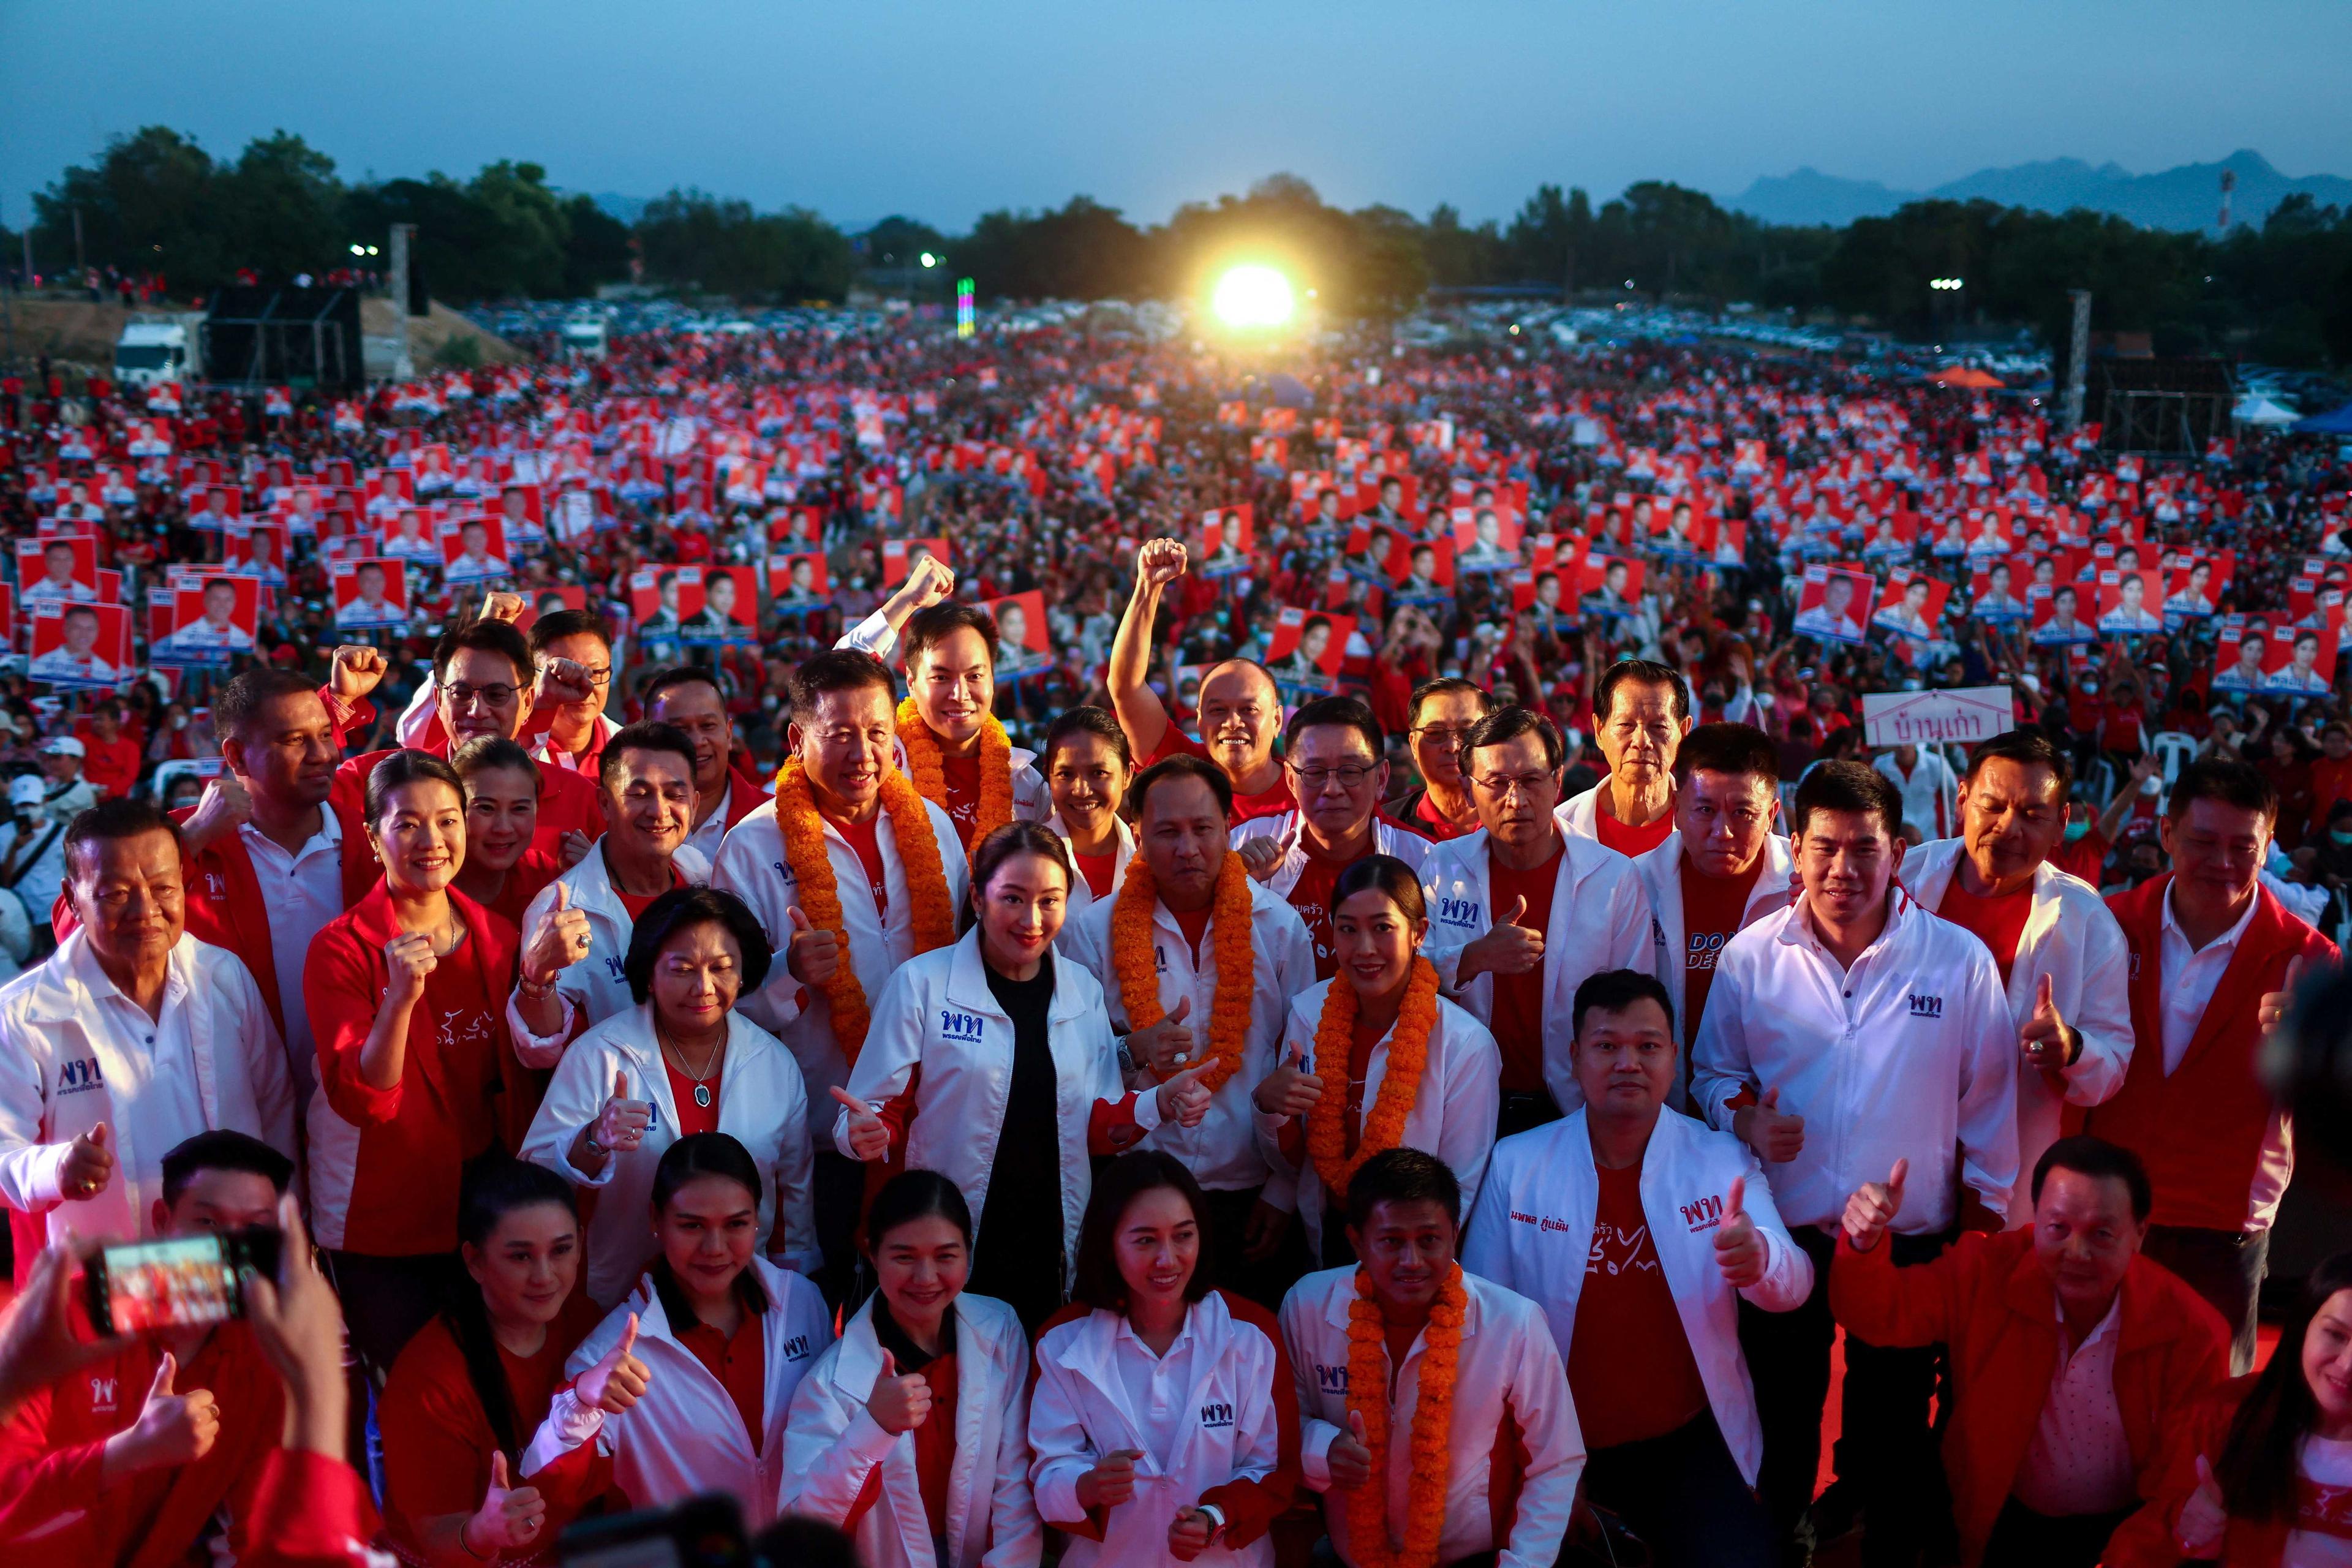 Paetongtarn Shinawatra poses with other members of parliament candidates during a general election campaign in Kanchanaburi province, Thailand, Jan 29. Photo: Reuters